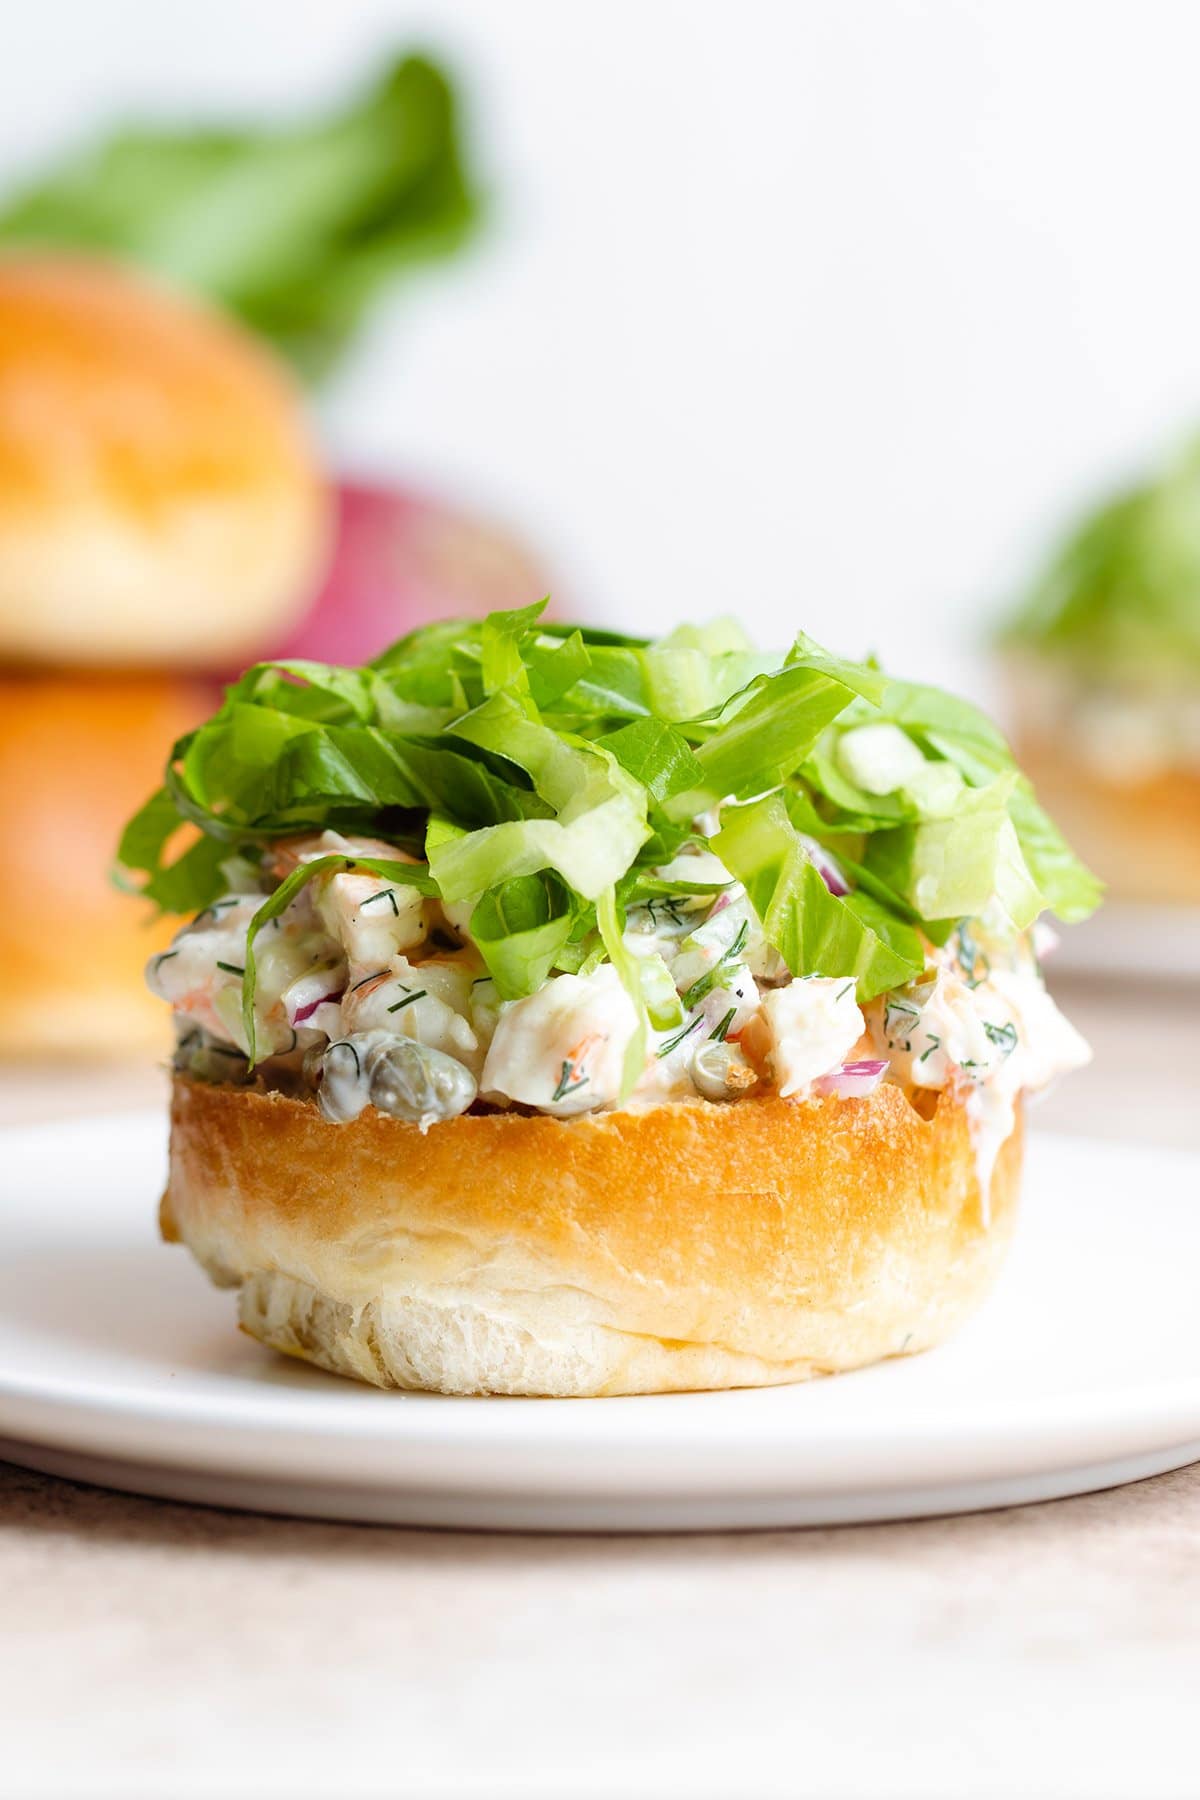 A bottom of a toasted brioche bun with creamy shrimp salad and shredded romaine lettuce on top.